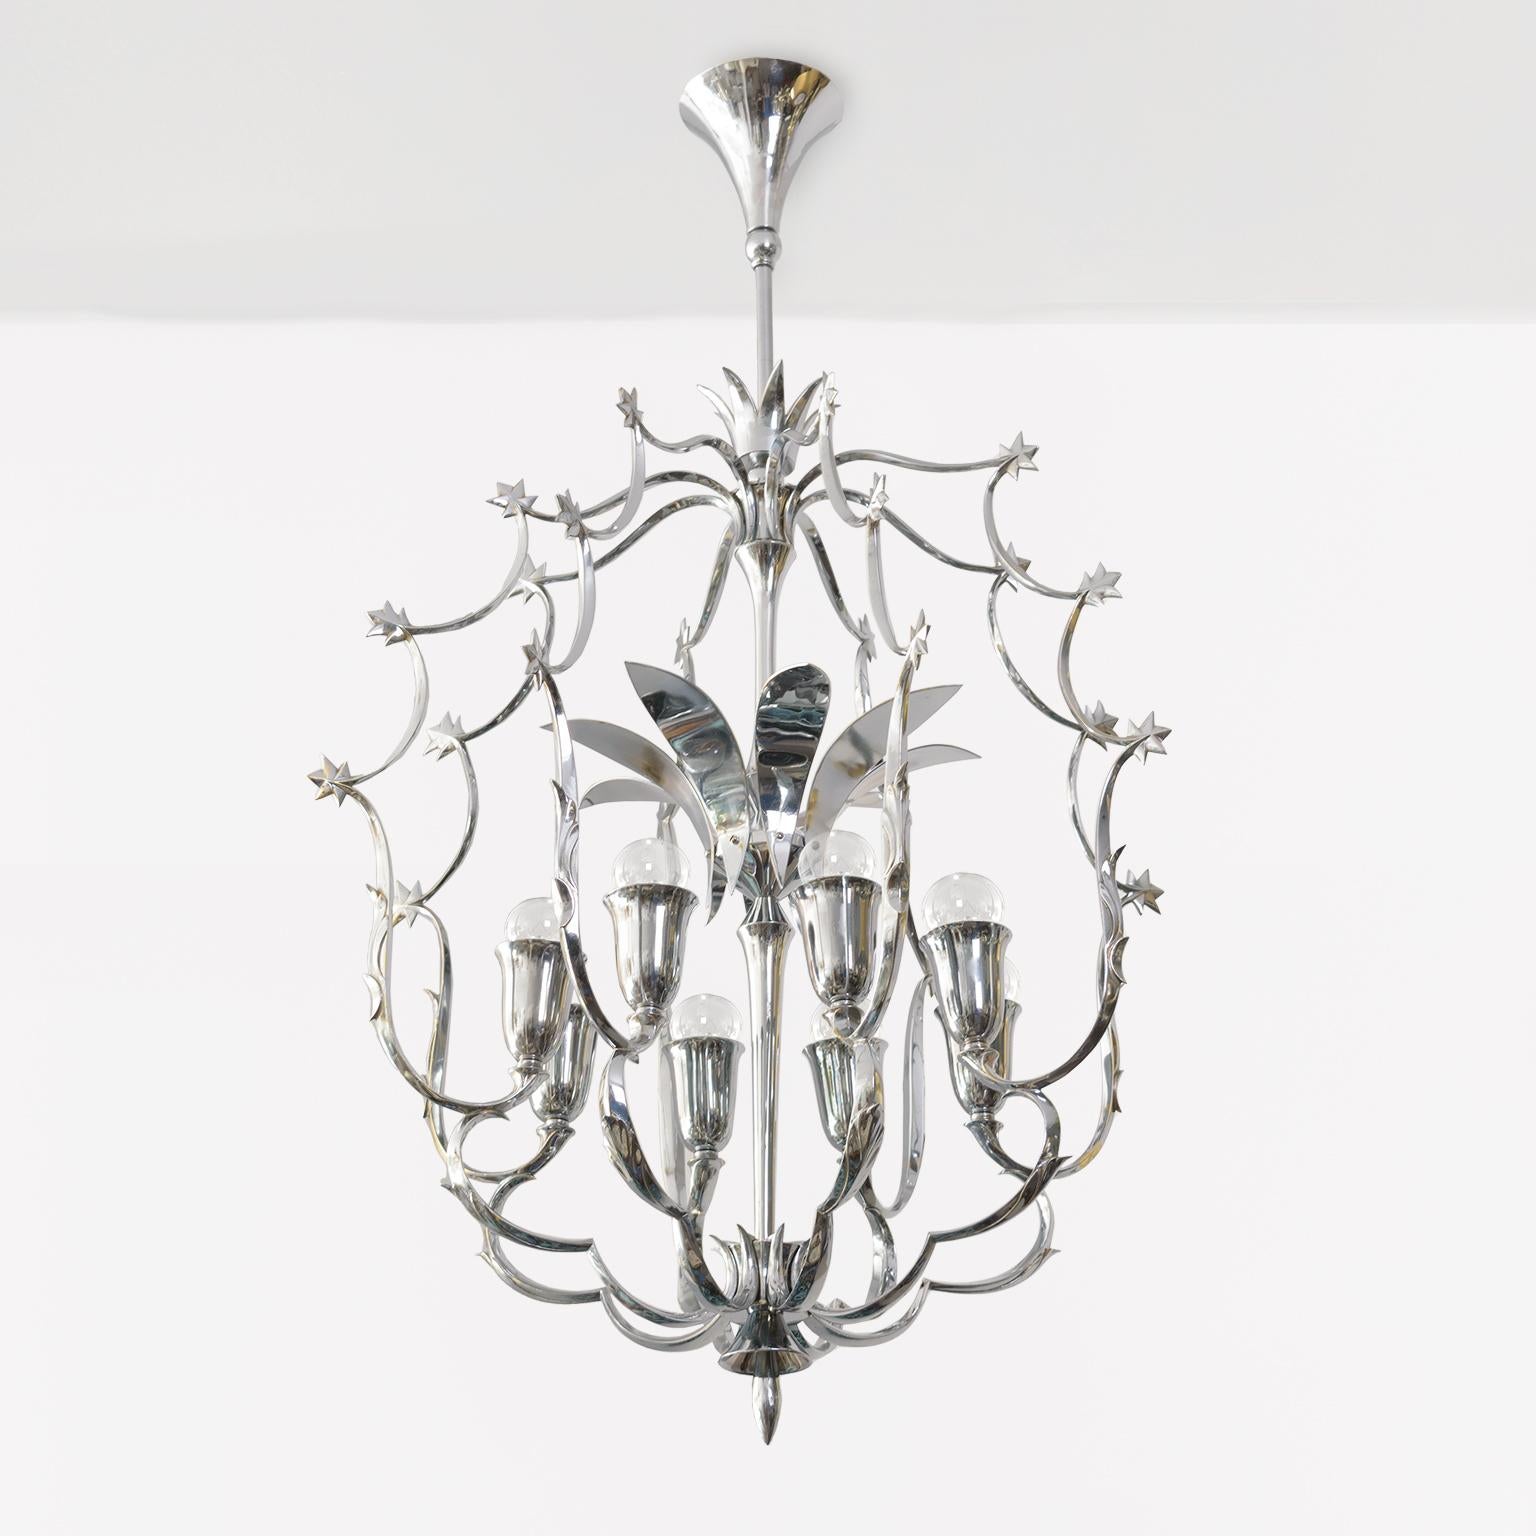 A large Scandinavia Modern 8 light chandelier in chromed brass. The fixtures structure consist of a series of graceful arches meeting at leaf like joints. At the center is a cluster of arched curved reflectors. Newly restored and rewired with